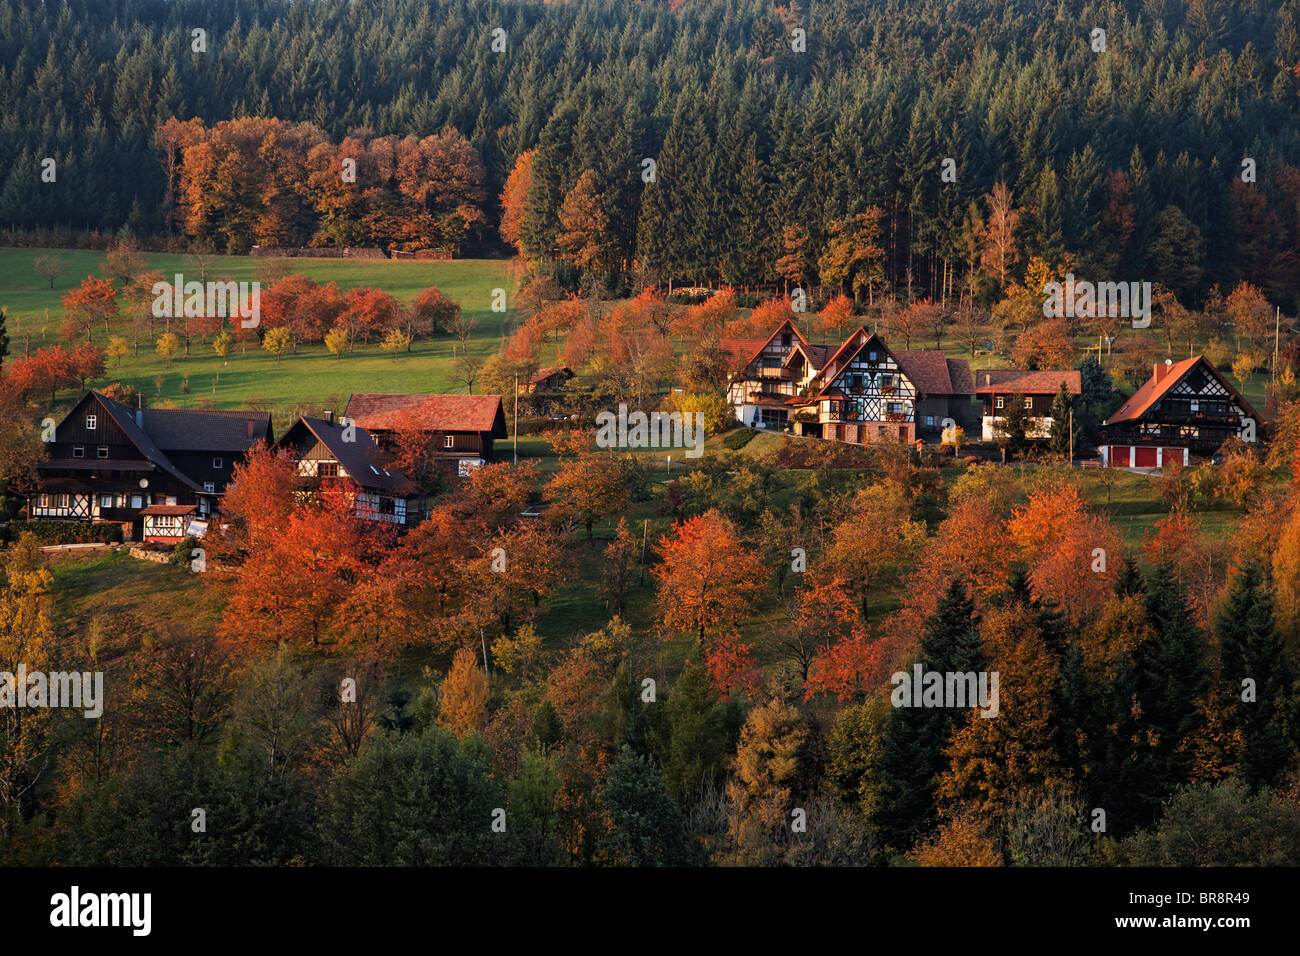 Half-timbered houses, Seebach valley, Baden-Wurttemberg, Germany Stock Photo